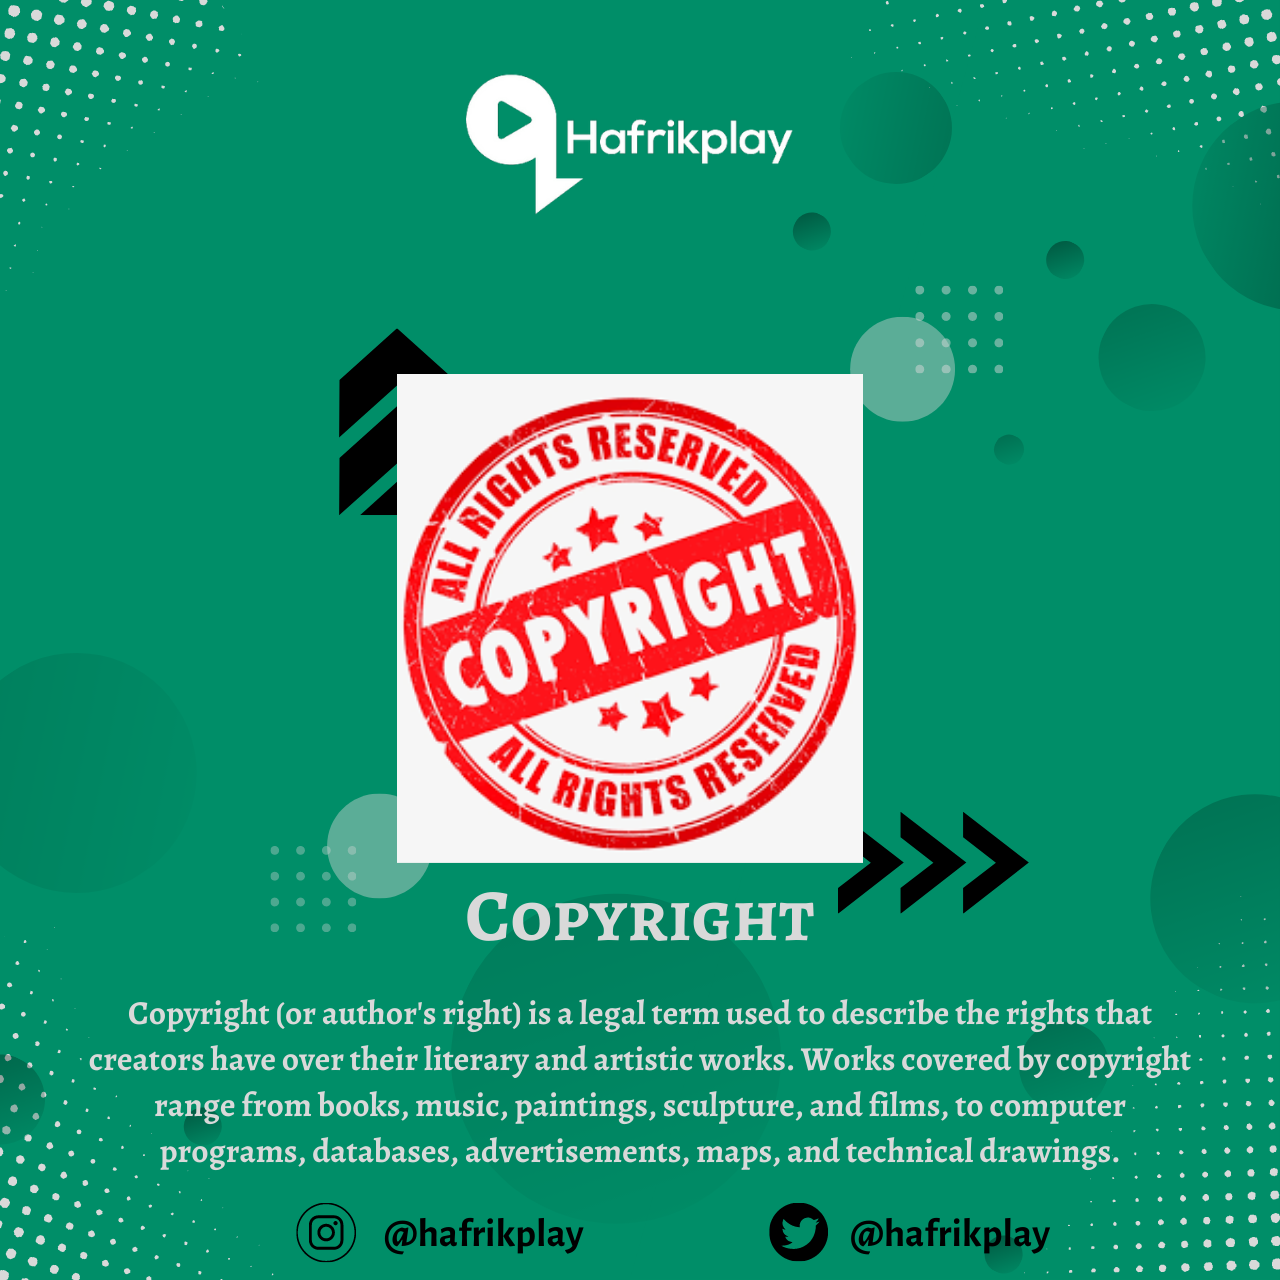 What are Copyrights ?